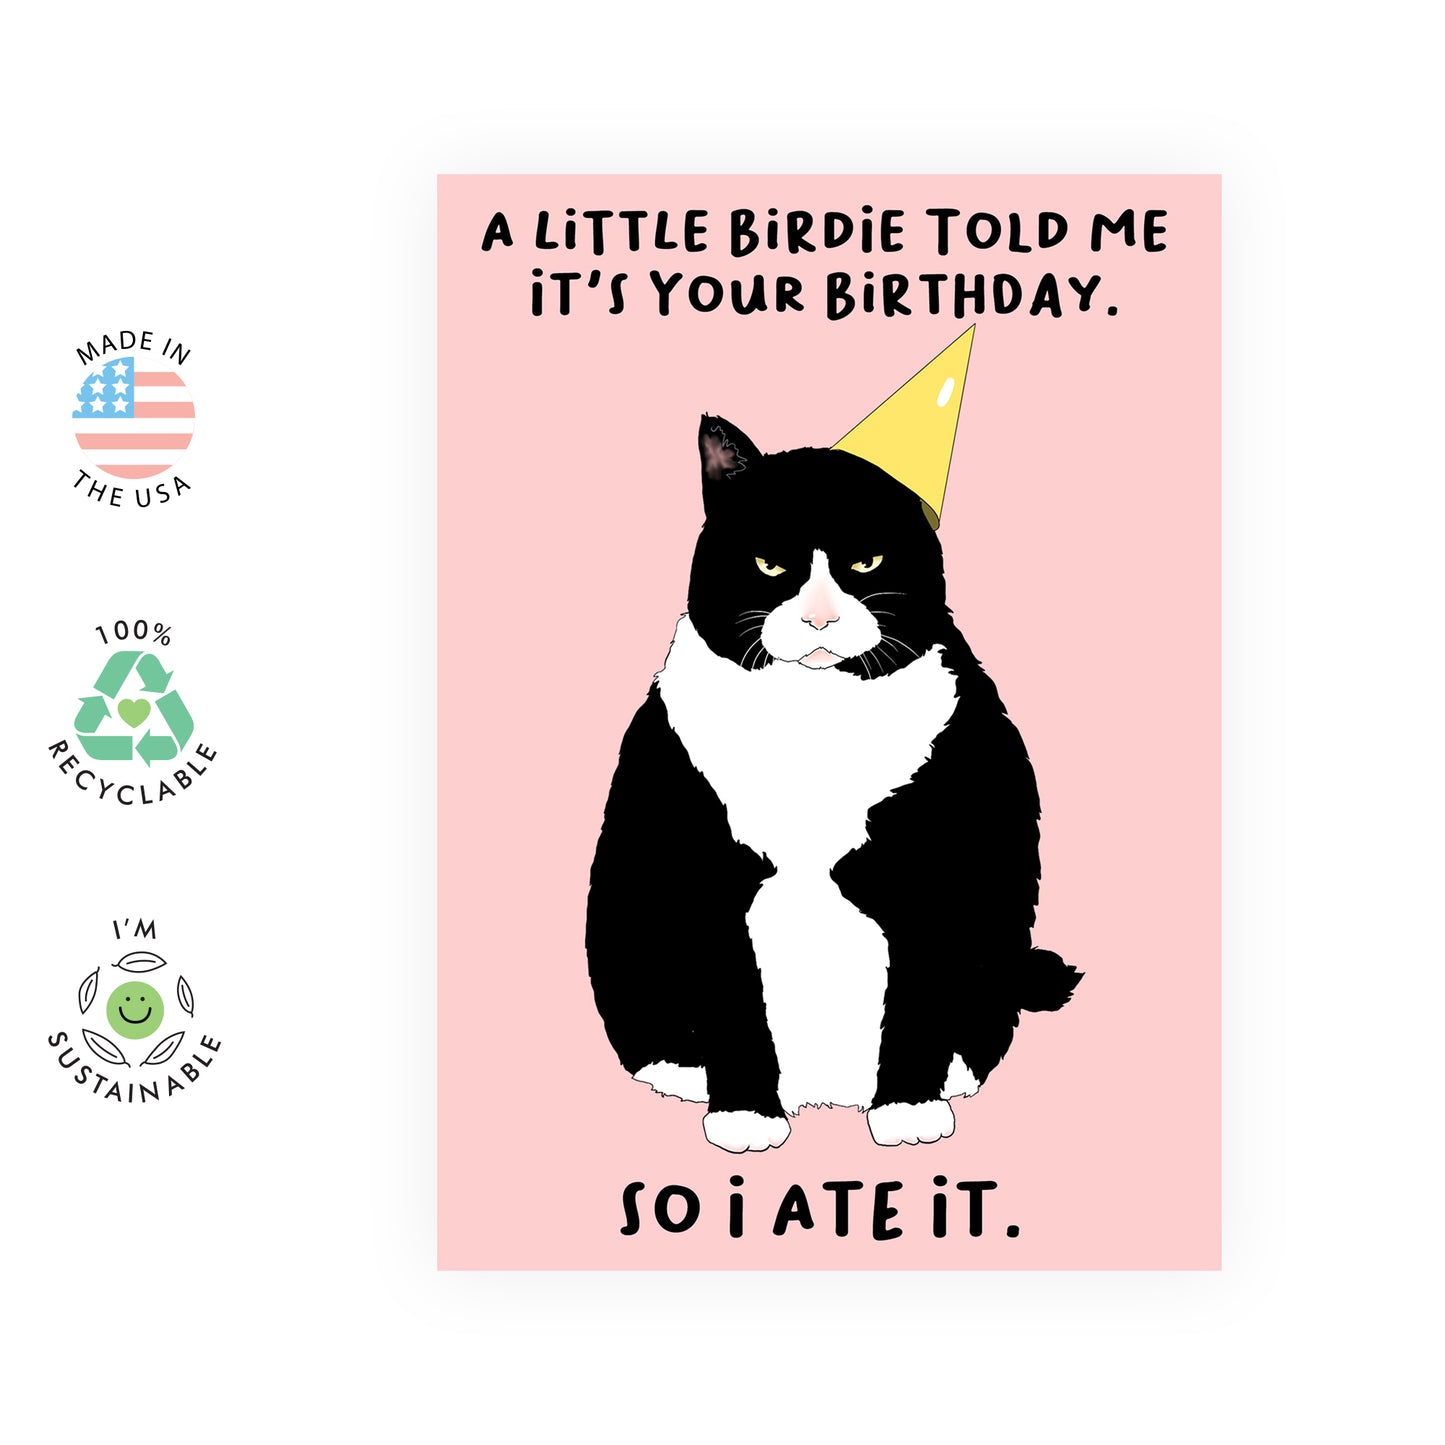 Funny Birthday Card - A Little Birdie Told Me It's Your Birthday - For Men Women Him Her